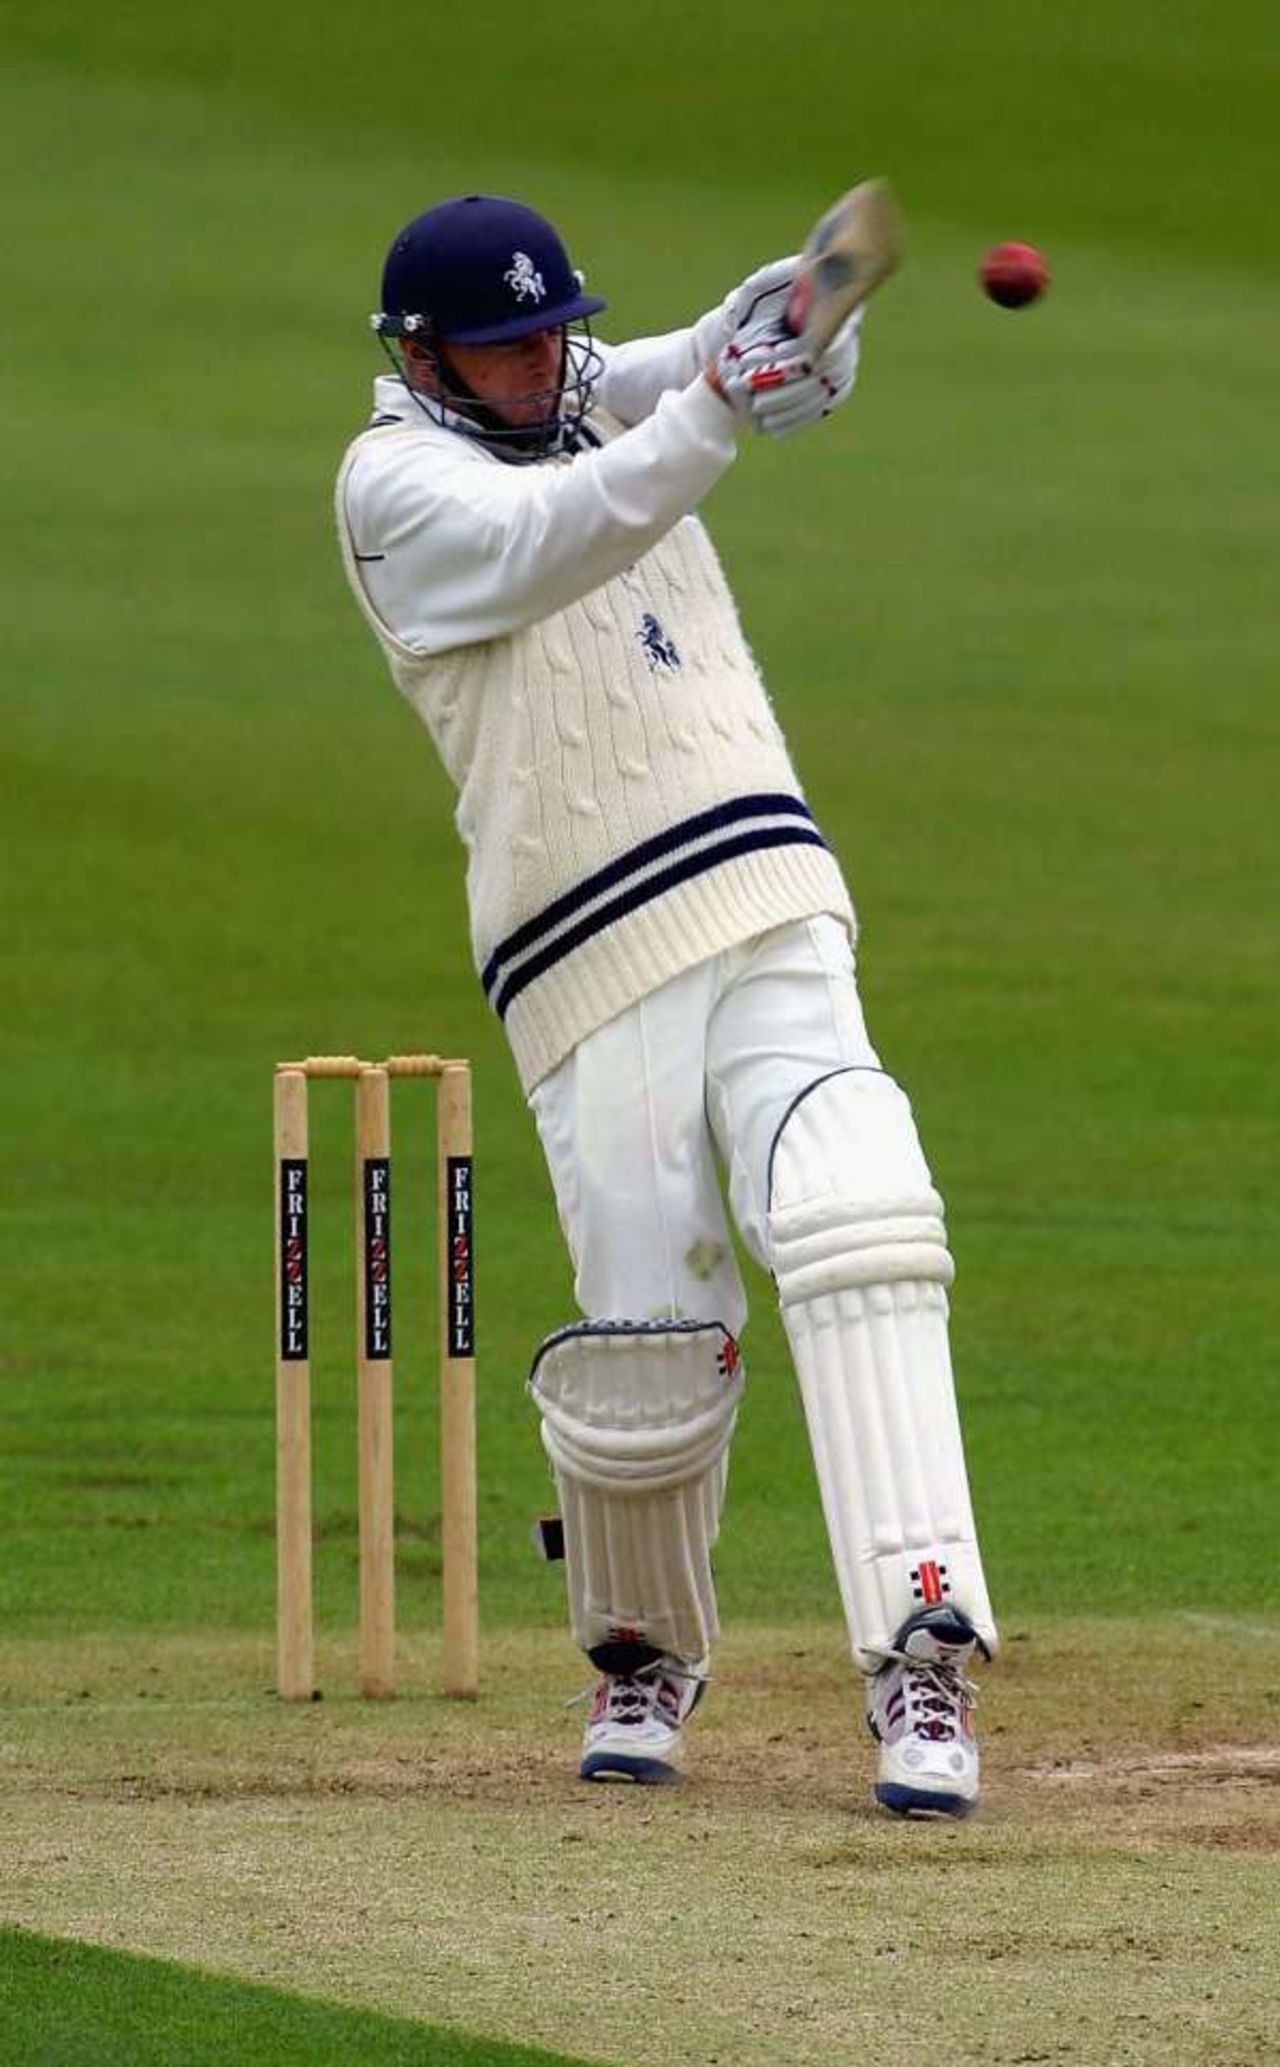 David Fulton of Kent hits out on his way to 88 not out at lunch during the Challenge match between Kent and Sri Lanka at the St Lawrence ground, Canterbury (28 Apr 2002)